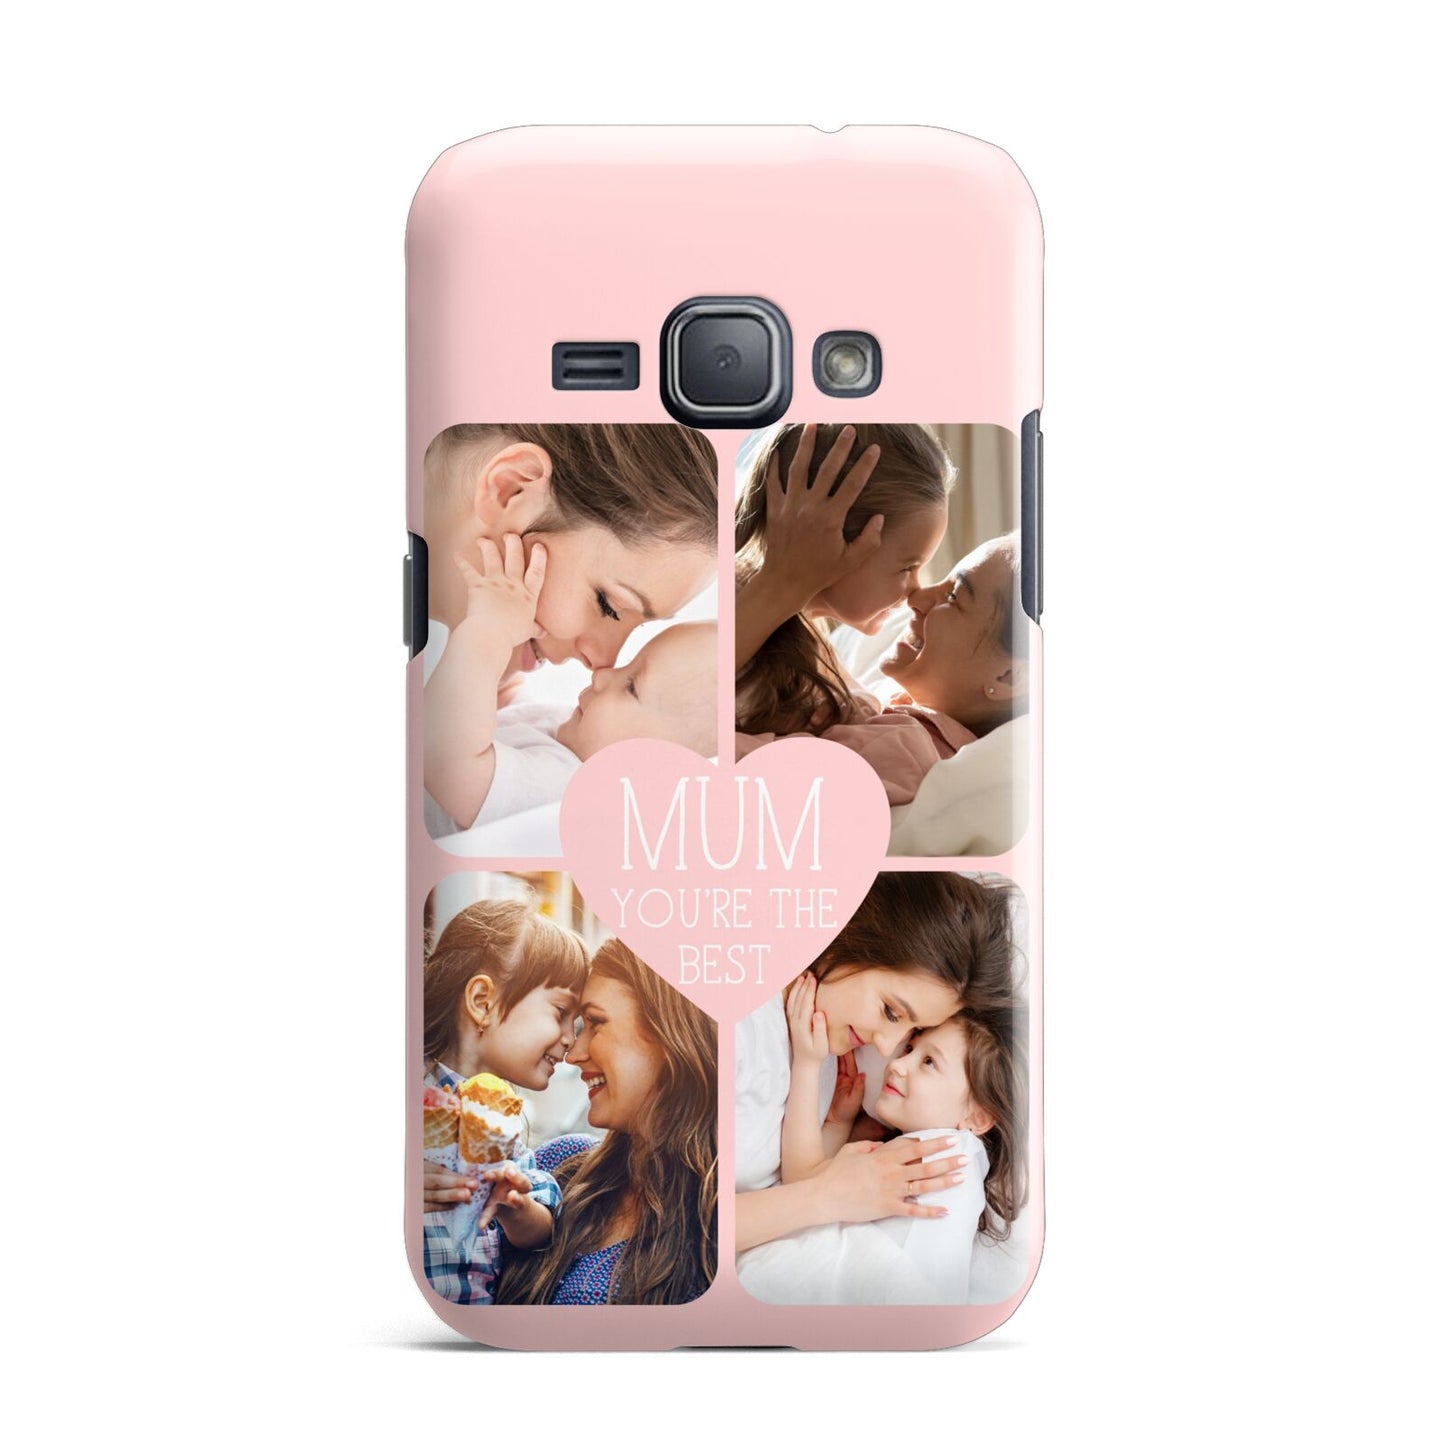 Mothers Day Four Photo Upload Samsung Galaxy J1 2016 Case